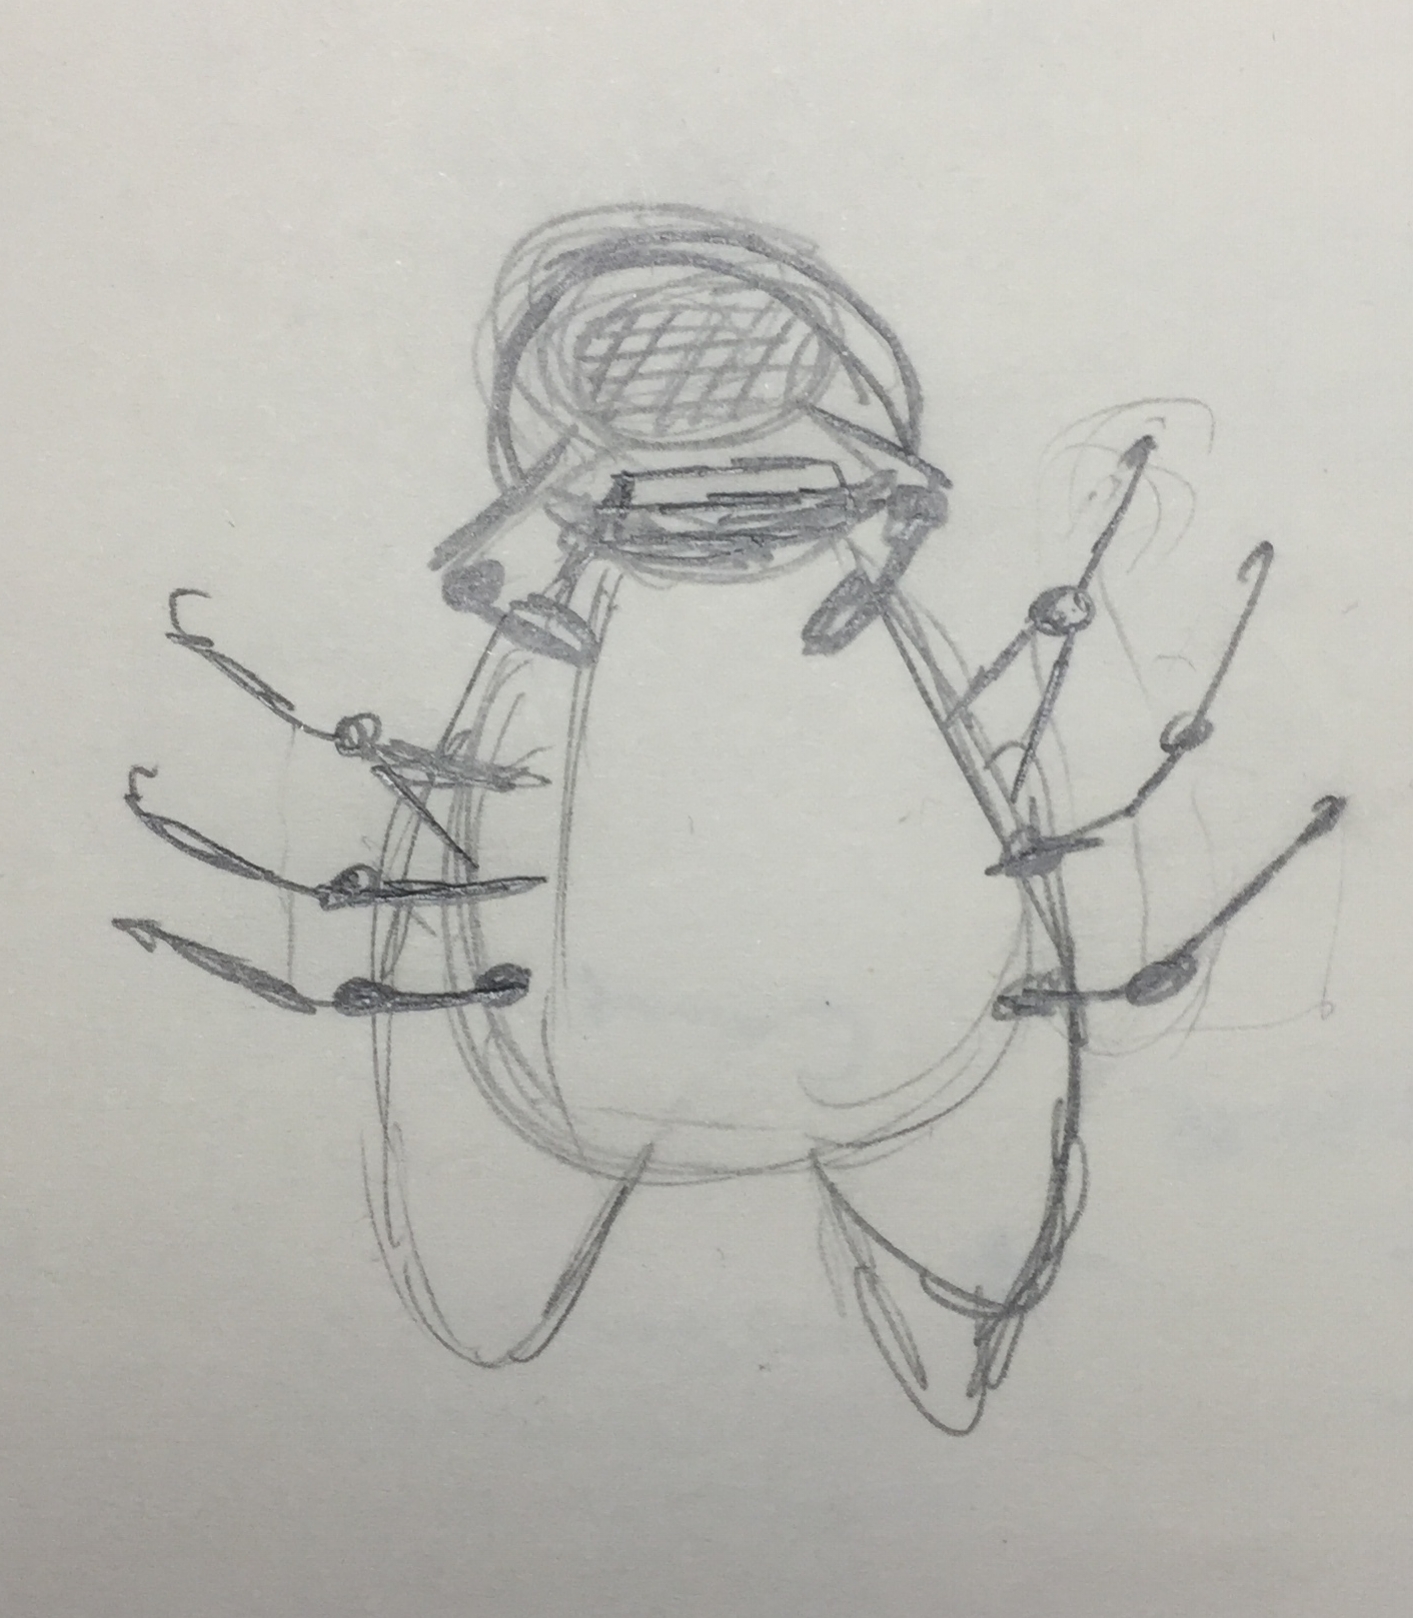  preliminary sketch of The Fly 